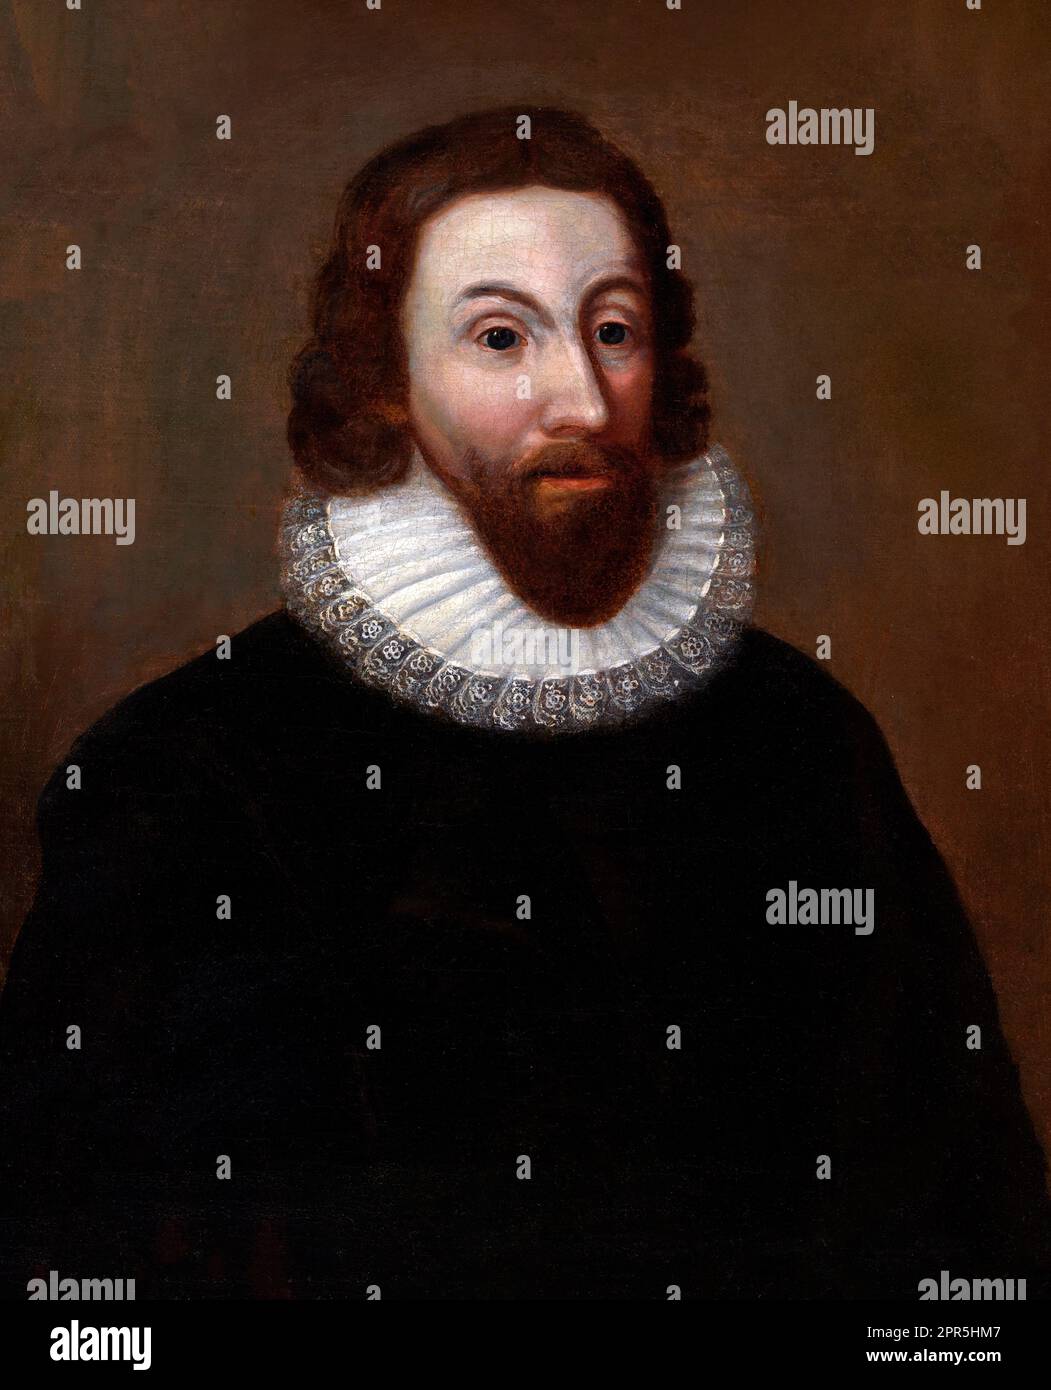 John Winthrop. Portrait of the English Puritan lawyer and first Governor of the Massachusetts Bay Colony, John Winthrop (1587/88-1649), oil on canvas, unknown artist, c. 1800 after an early 17th century painting Stock Photo